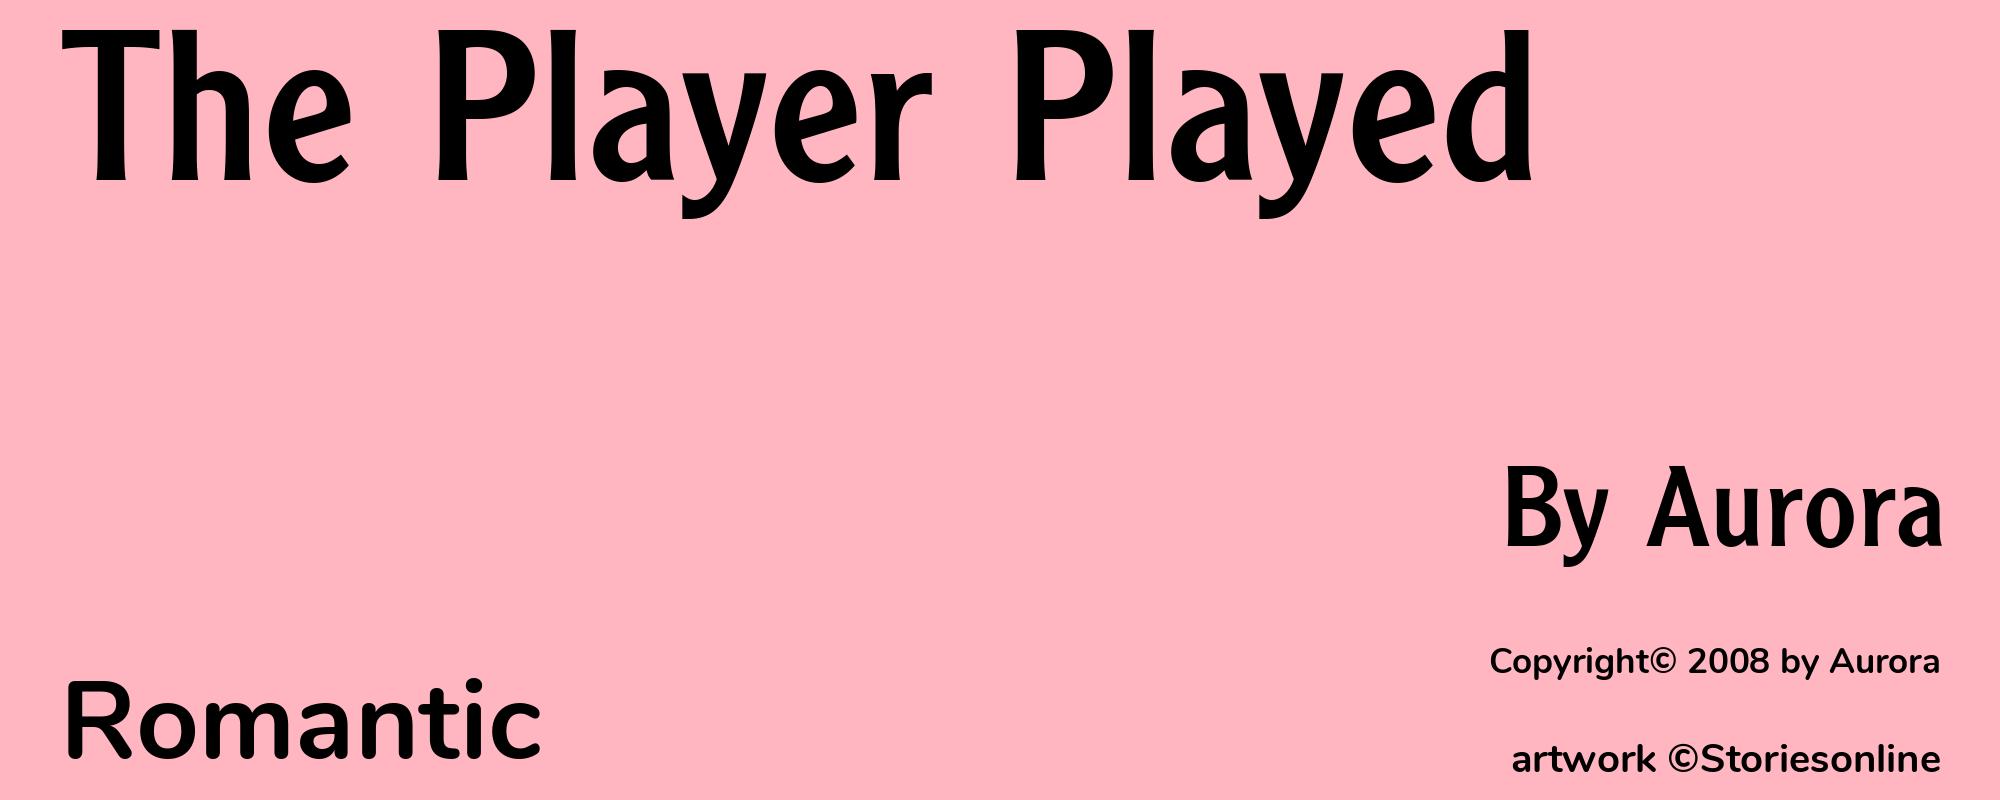 The Player Played - Cover